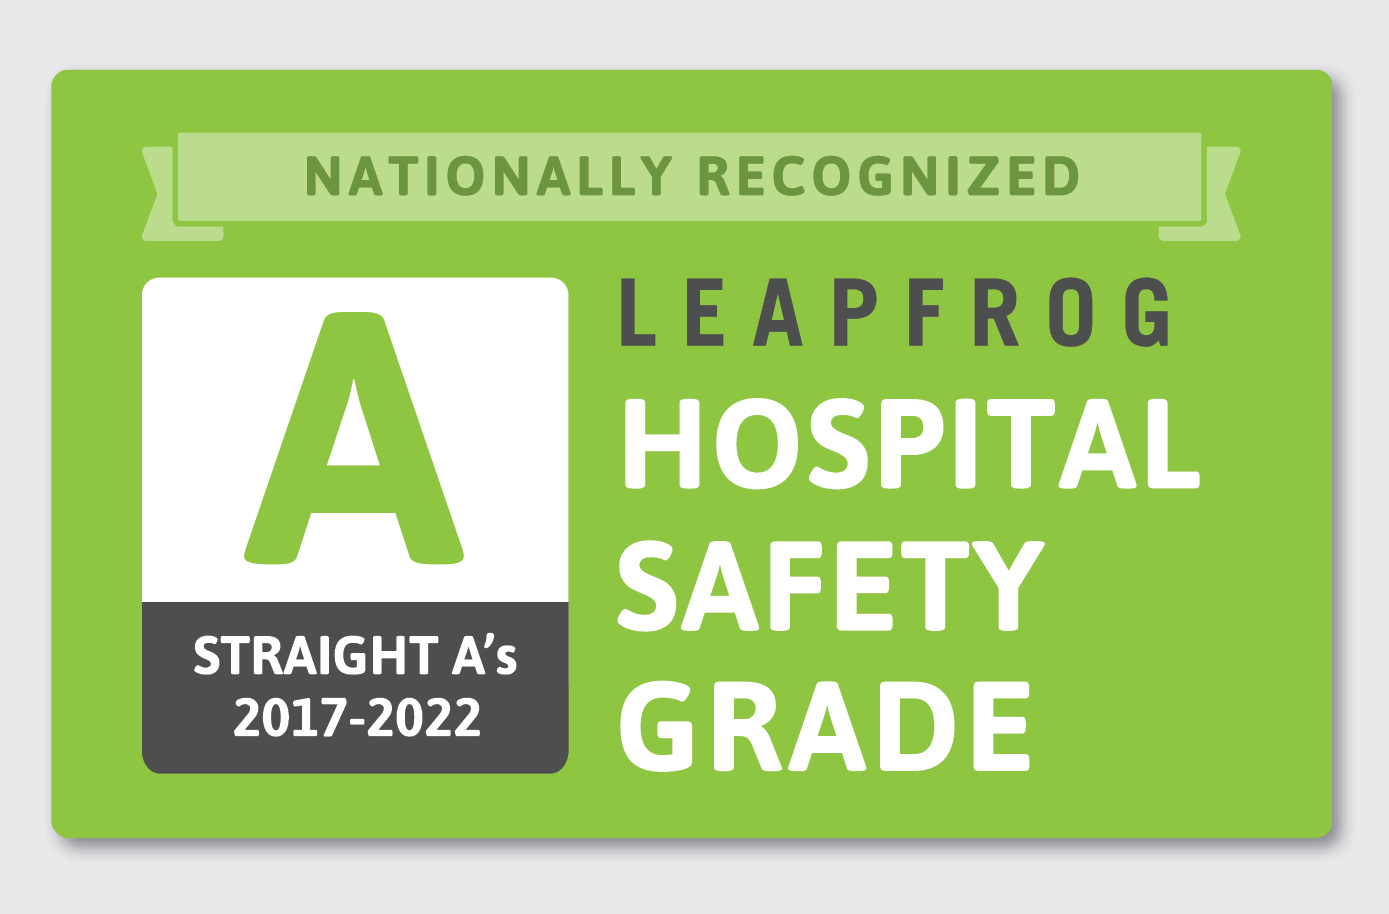 Leap Frog Hospital Safety Award graphic